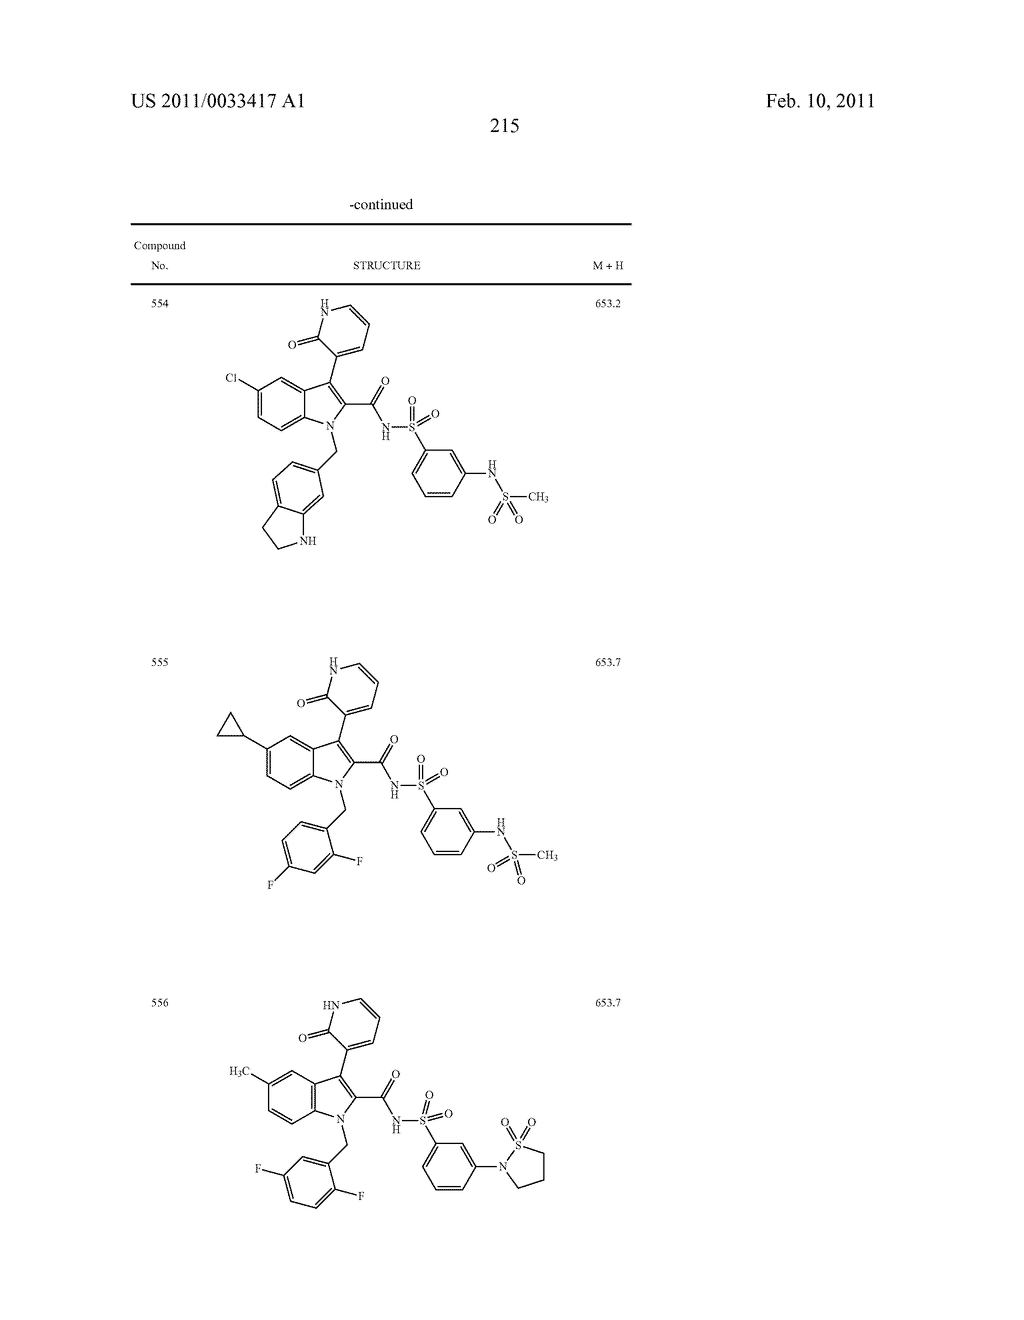 2,3-SUBSTITUTED INDOLE DERIVATIVES FOR TREATING VIRAL INFECTIONS - diagram, schematic, and image 216